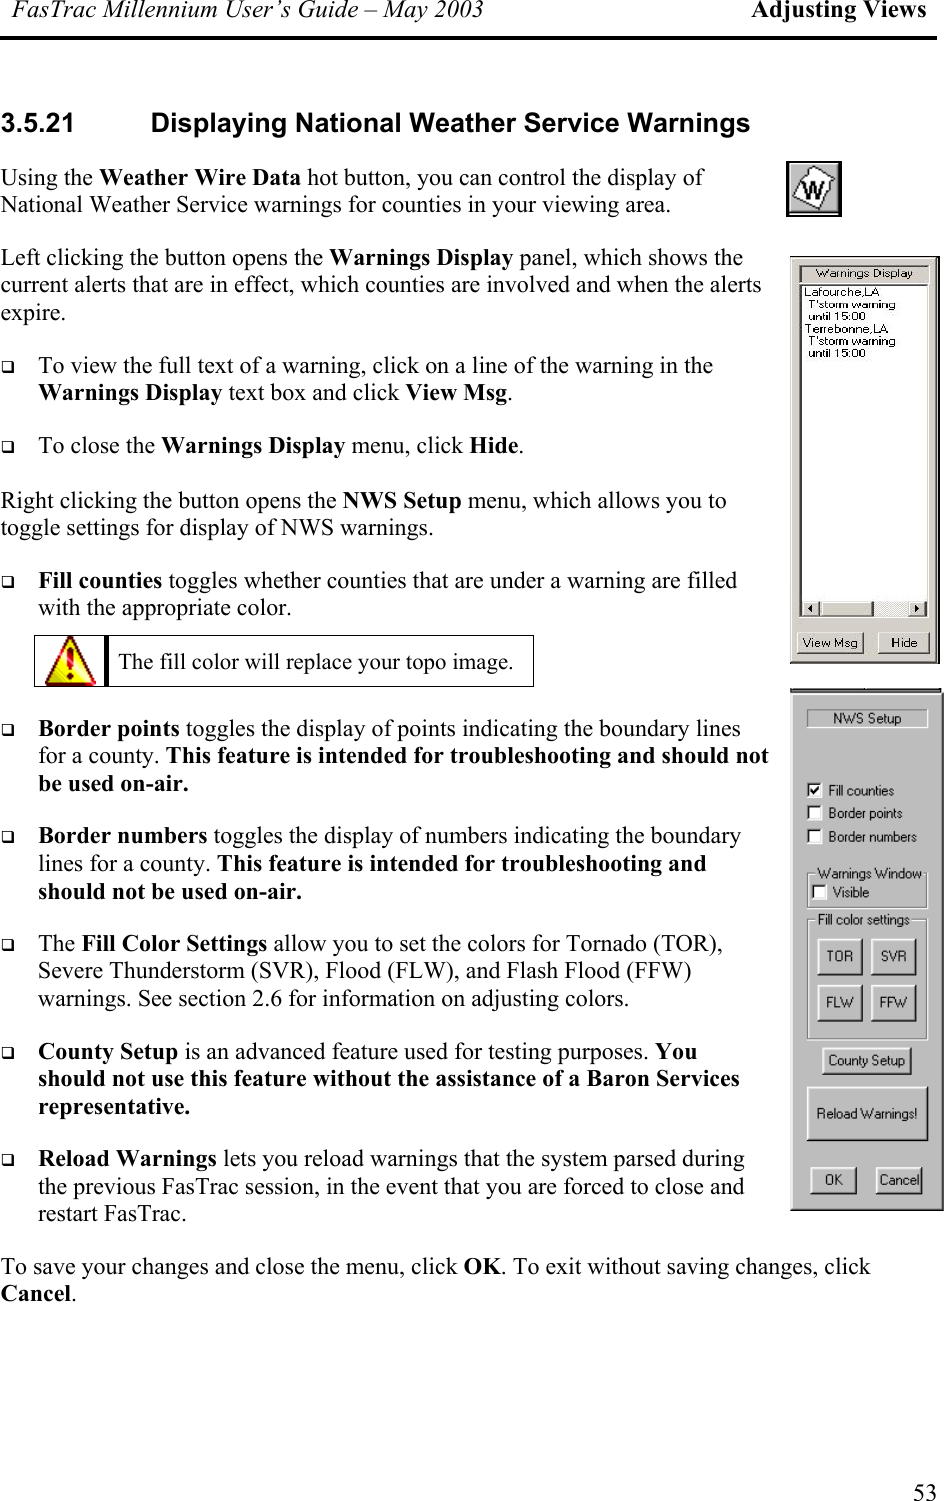 FasTrac Millennium User’s Guide – May 2003 Adjusting Views 3.5.21  Displaying National Weather Service Warnings Using the Weather Wire Data hot button, you can control the display of National Weather Service warnings for counties in your viewing area. Left clicking the button opens the Warnings Display panel, which shows the current alerts that are in effect, which counties are involved and when the alerts expire.   To view the full text of a warning, click on a line of the warning in the Warnings Display text box and click View Msg.   To close the Warnings Display menu, click Hide.  Right clicking the button opens the NWS Setup menu, which allows you to toggle settings for display of NWS warnings.   Fill counties toggles whether counties that are under a warning are filled with the appropriate color.   The fill color will replace your topo image.     Border points toggles the display of points indicating the boundary lines for a county. This feature is intended for troubleshooting and should nbe used on-air. ot   Border numbers toggles the display of numbers indicating the boundary lines for a county. This feature is intended for troubleshooting and should not be used on-air.   The Fill Color Settings allow you to set the colors for Tornado (TOR), Severe Thunderstorm (SVR), Flood (FLW), and Flash Flood (FFW) warnings. See section 2.6 for information on adjusting colors.   County Setup is an advanced feature used for testing purposes. You should not use this feature without the assistance of a Baron Services representative.   Reload Warnings lets you reload warnings that the system parsed during the previous FasTrac session, in the event that you are forced to close and restart FasTrac. To save your changes and close the menu, click OK. To exit without saving changes, click Cancel. 53 